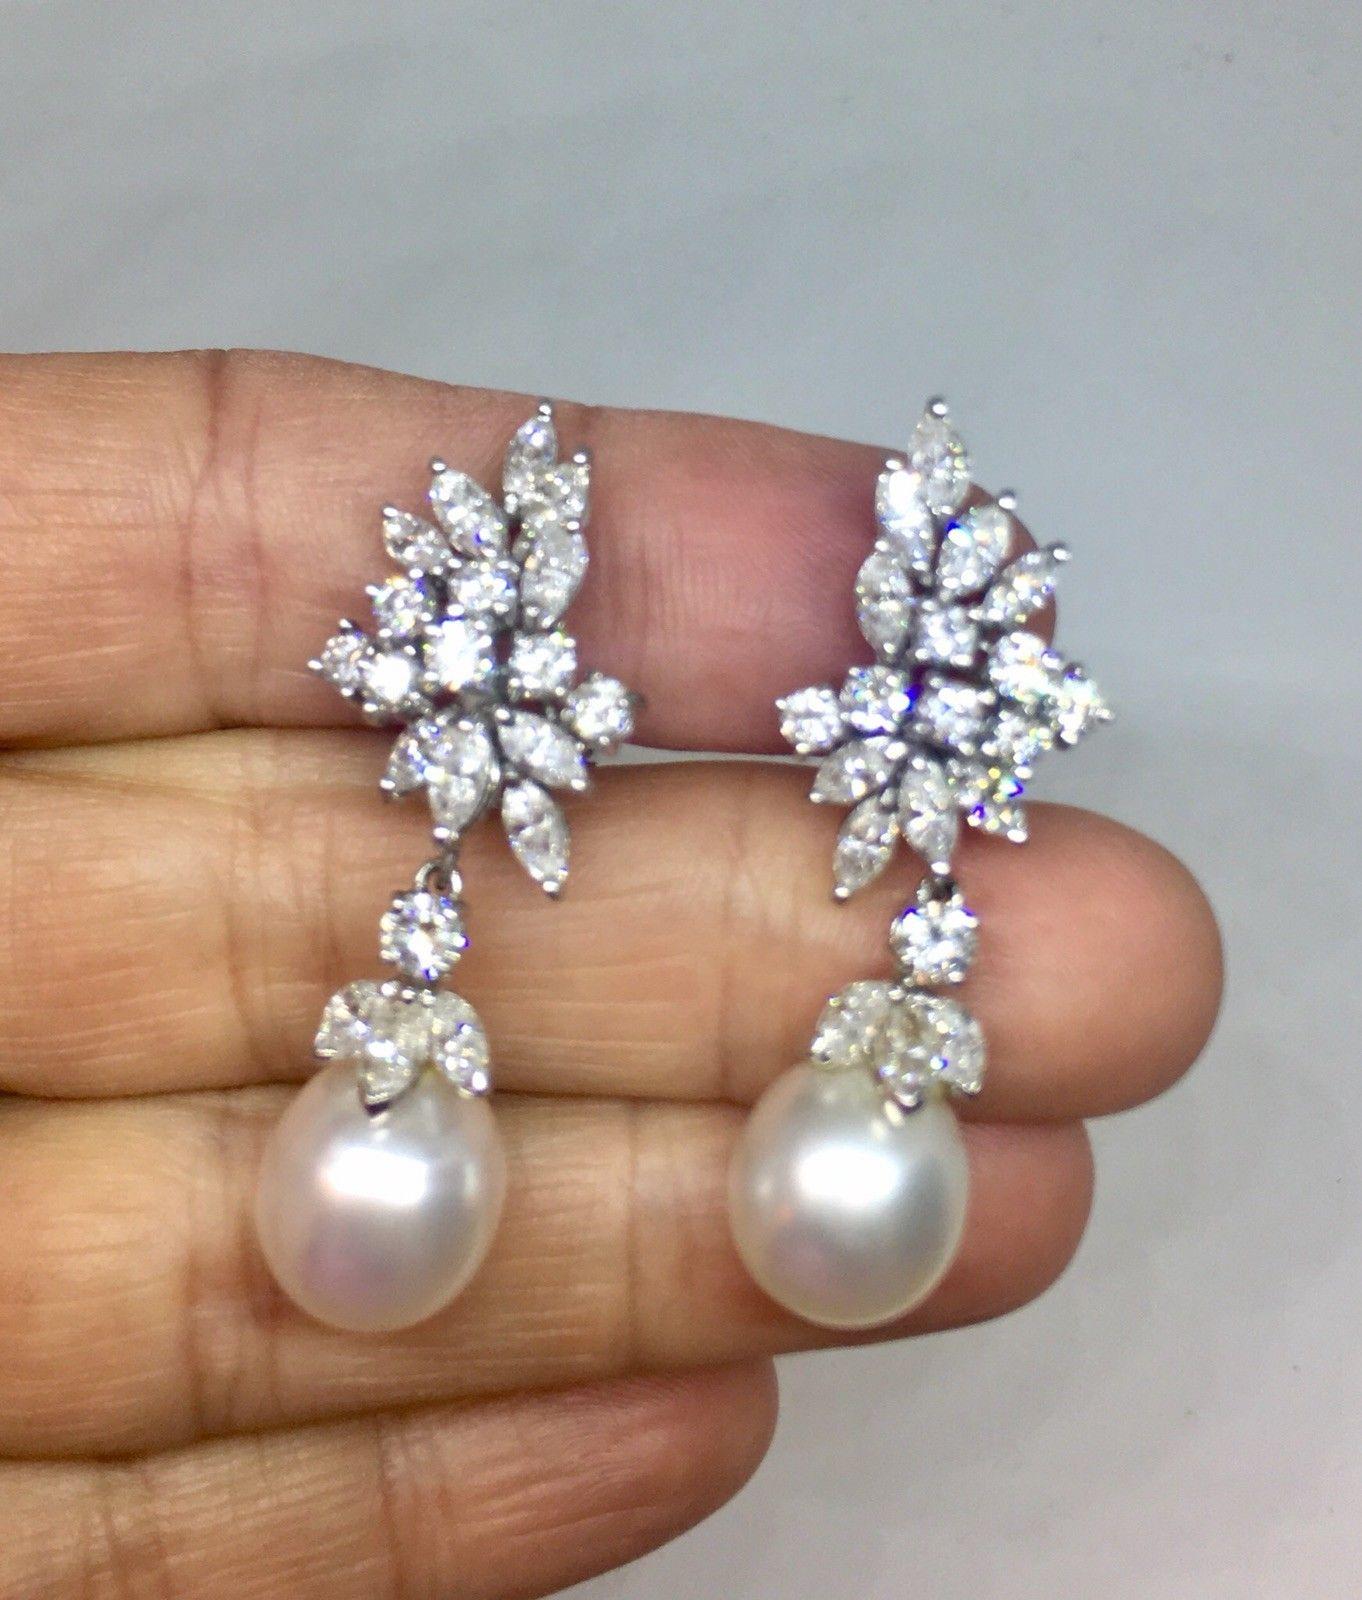 1950s Platinum 5.60 Carat VS Diamond South Sea Cultured Pearl Pendant Earrings In Excellent Condition For Sale In Shaker Heights, OH